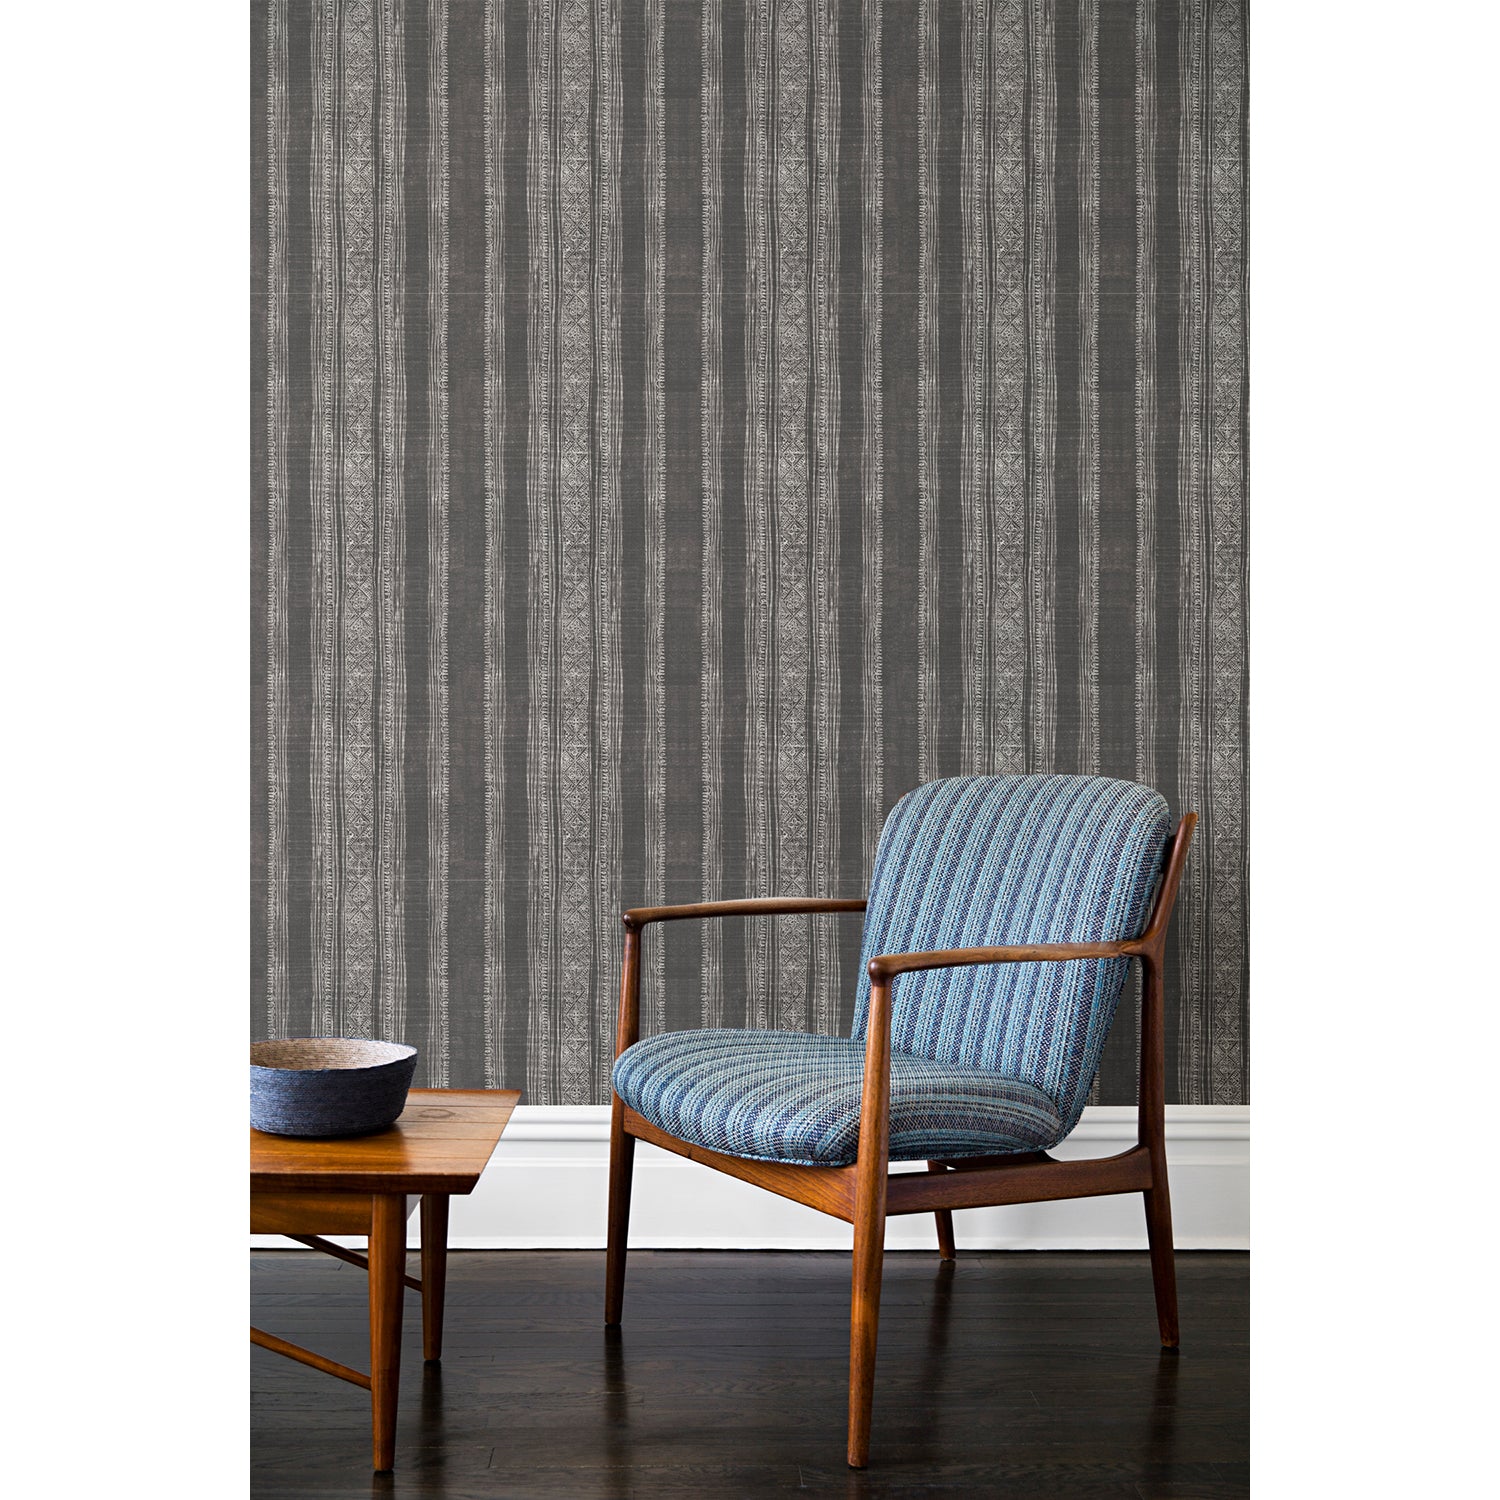 An armchair and coffee table in front of a wall papered in a striped pattern of intricate white lines over a washed gray background.